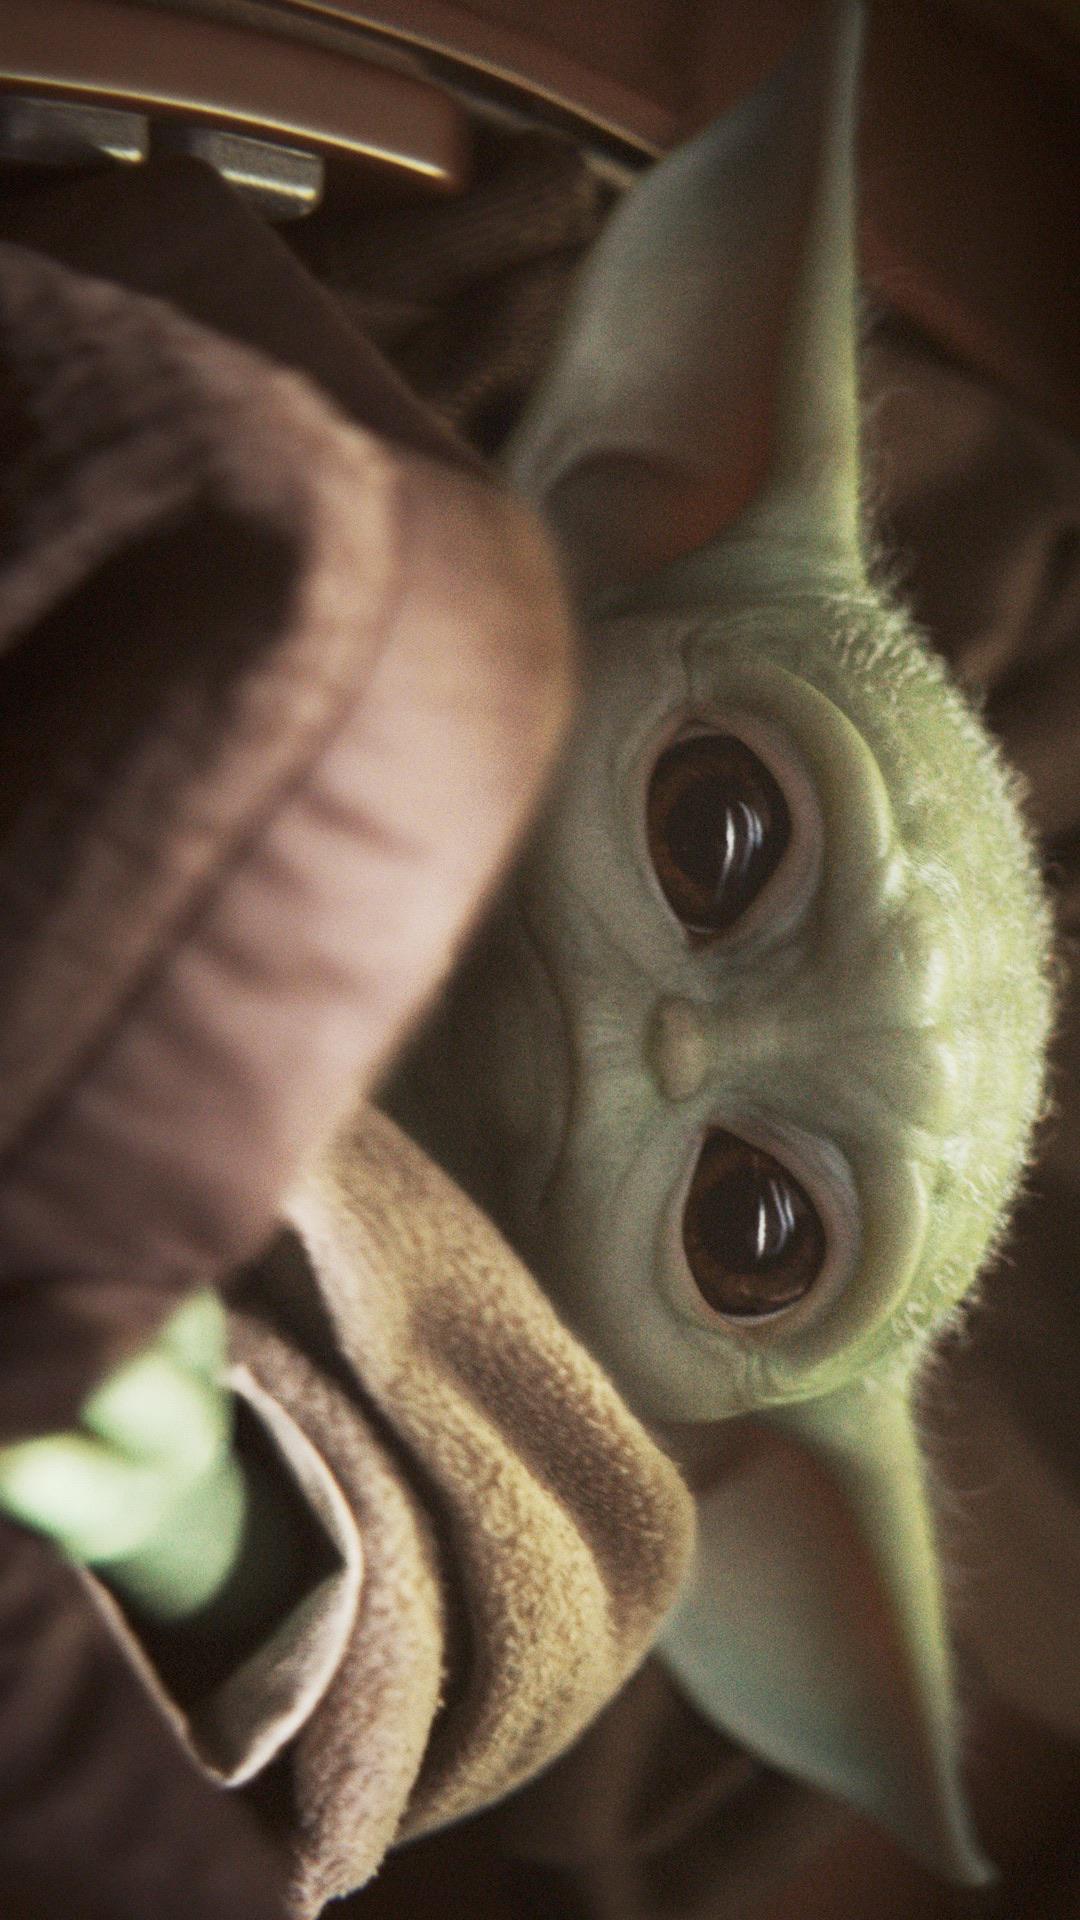 If baby Baby yoda isn't your wallpaper do you really have a